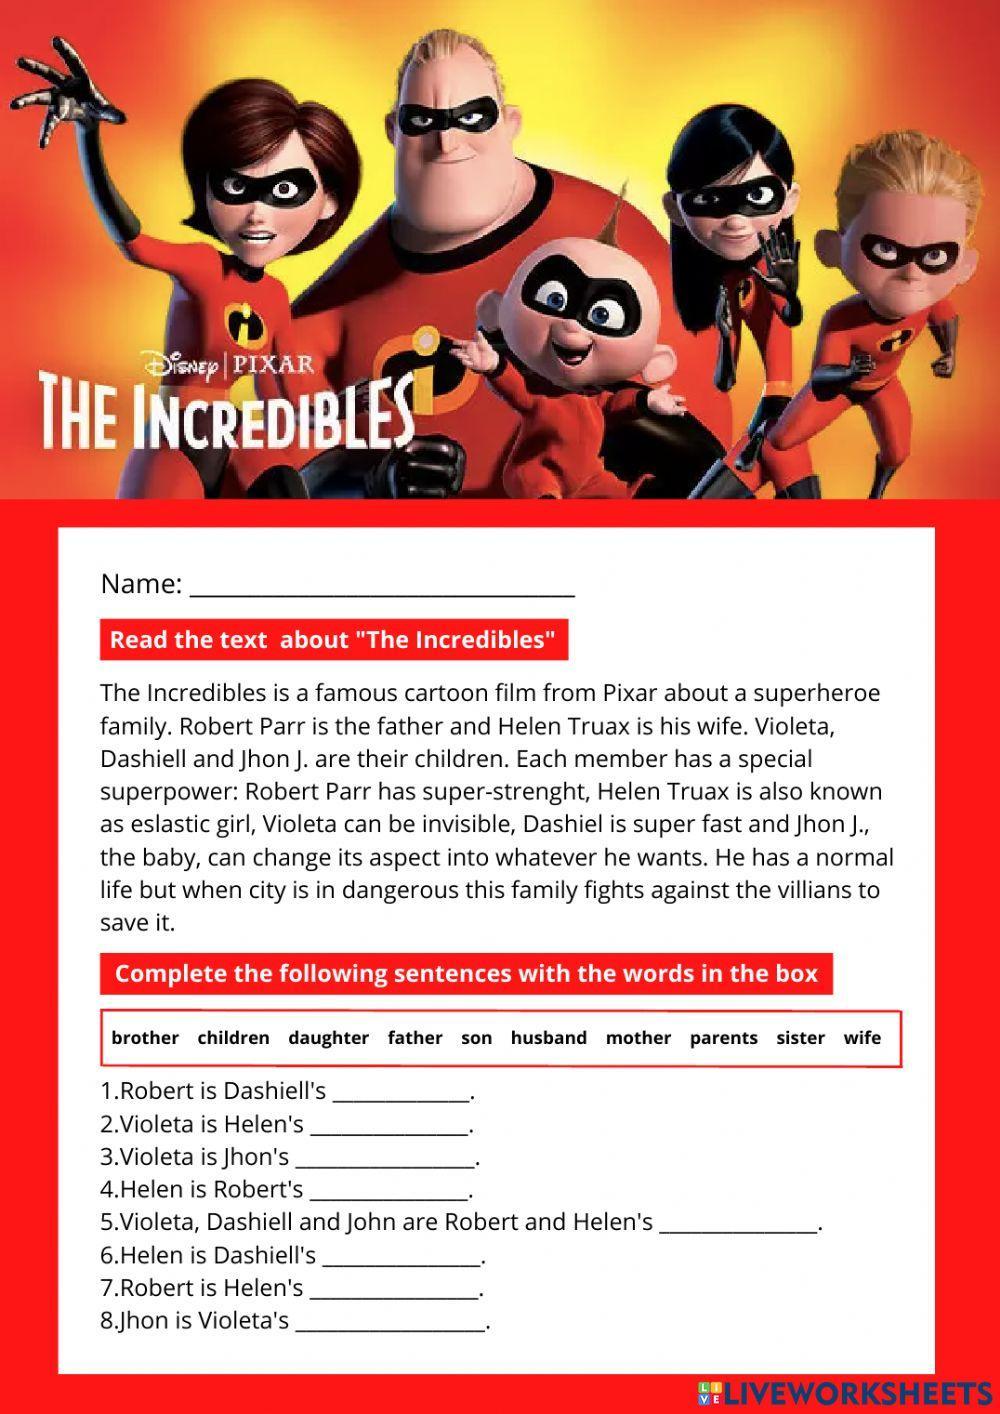 Family Tree: The Incredibles